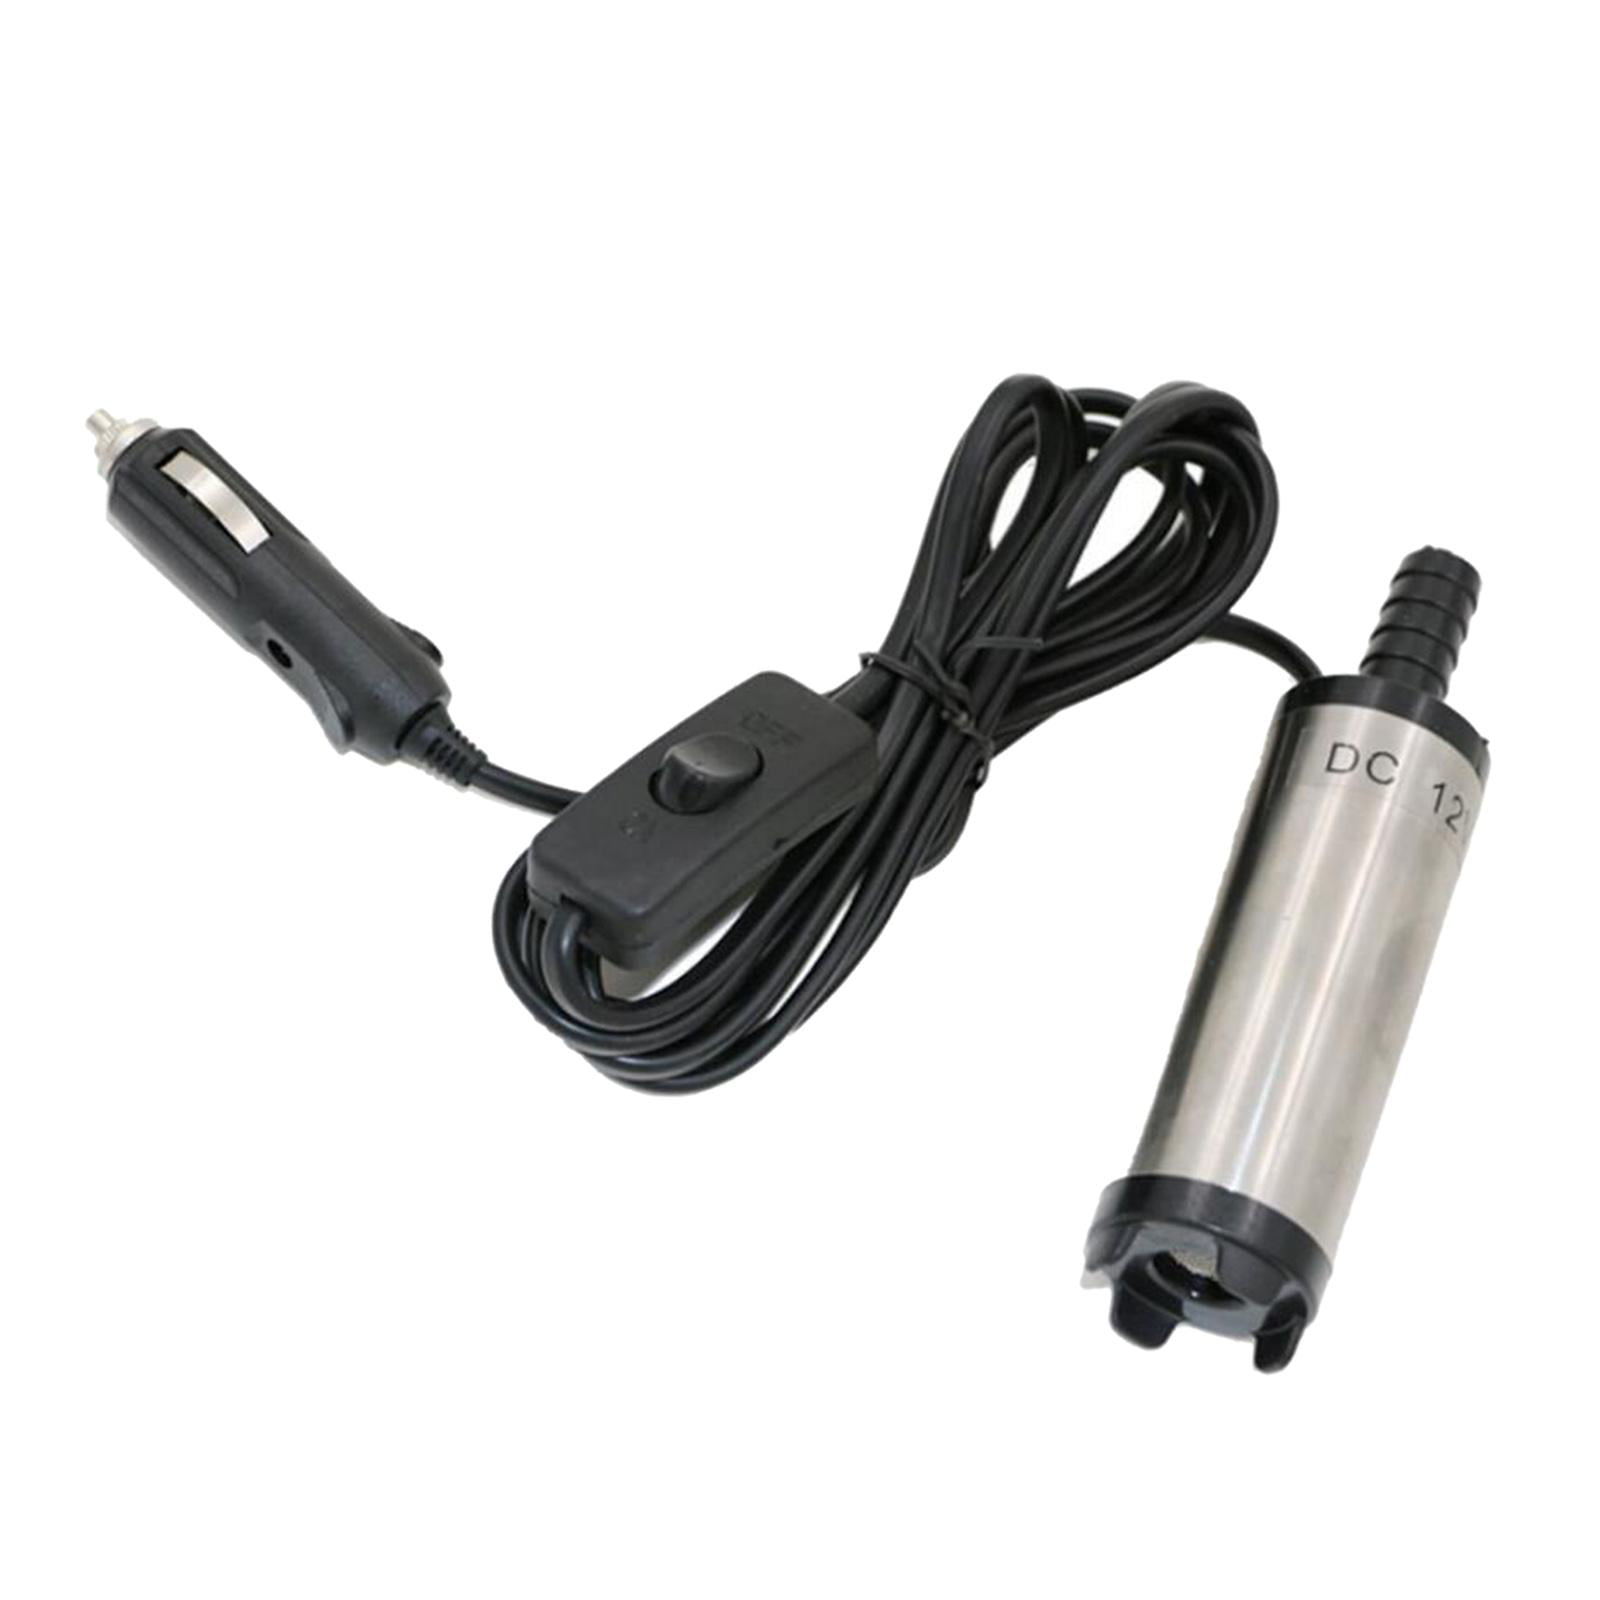 Stainless Steel Transfer Pump 12 V 51 mm Water Pump Submersible Pump for  Car Diesel Oil Heating Oil Water Fuel Transfer Pump with Cigarette Lighter